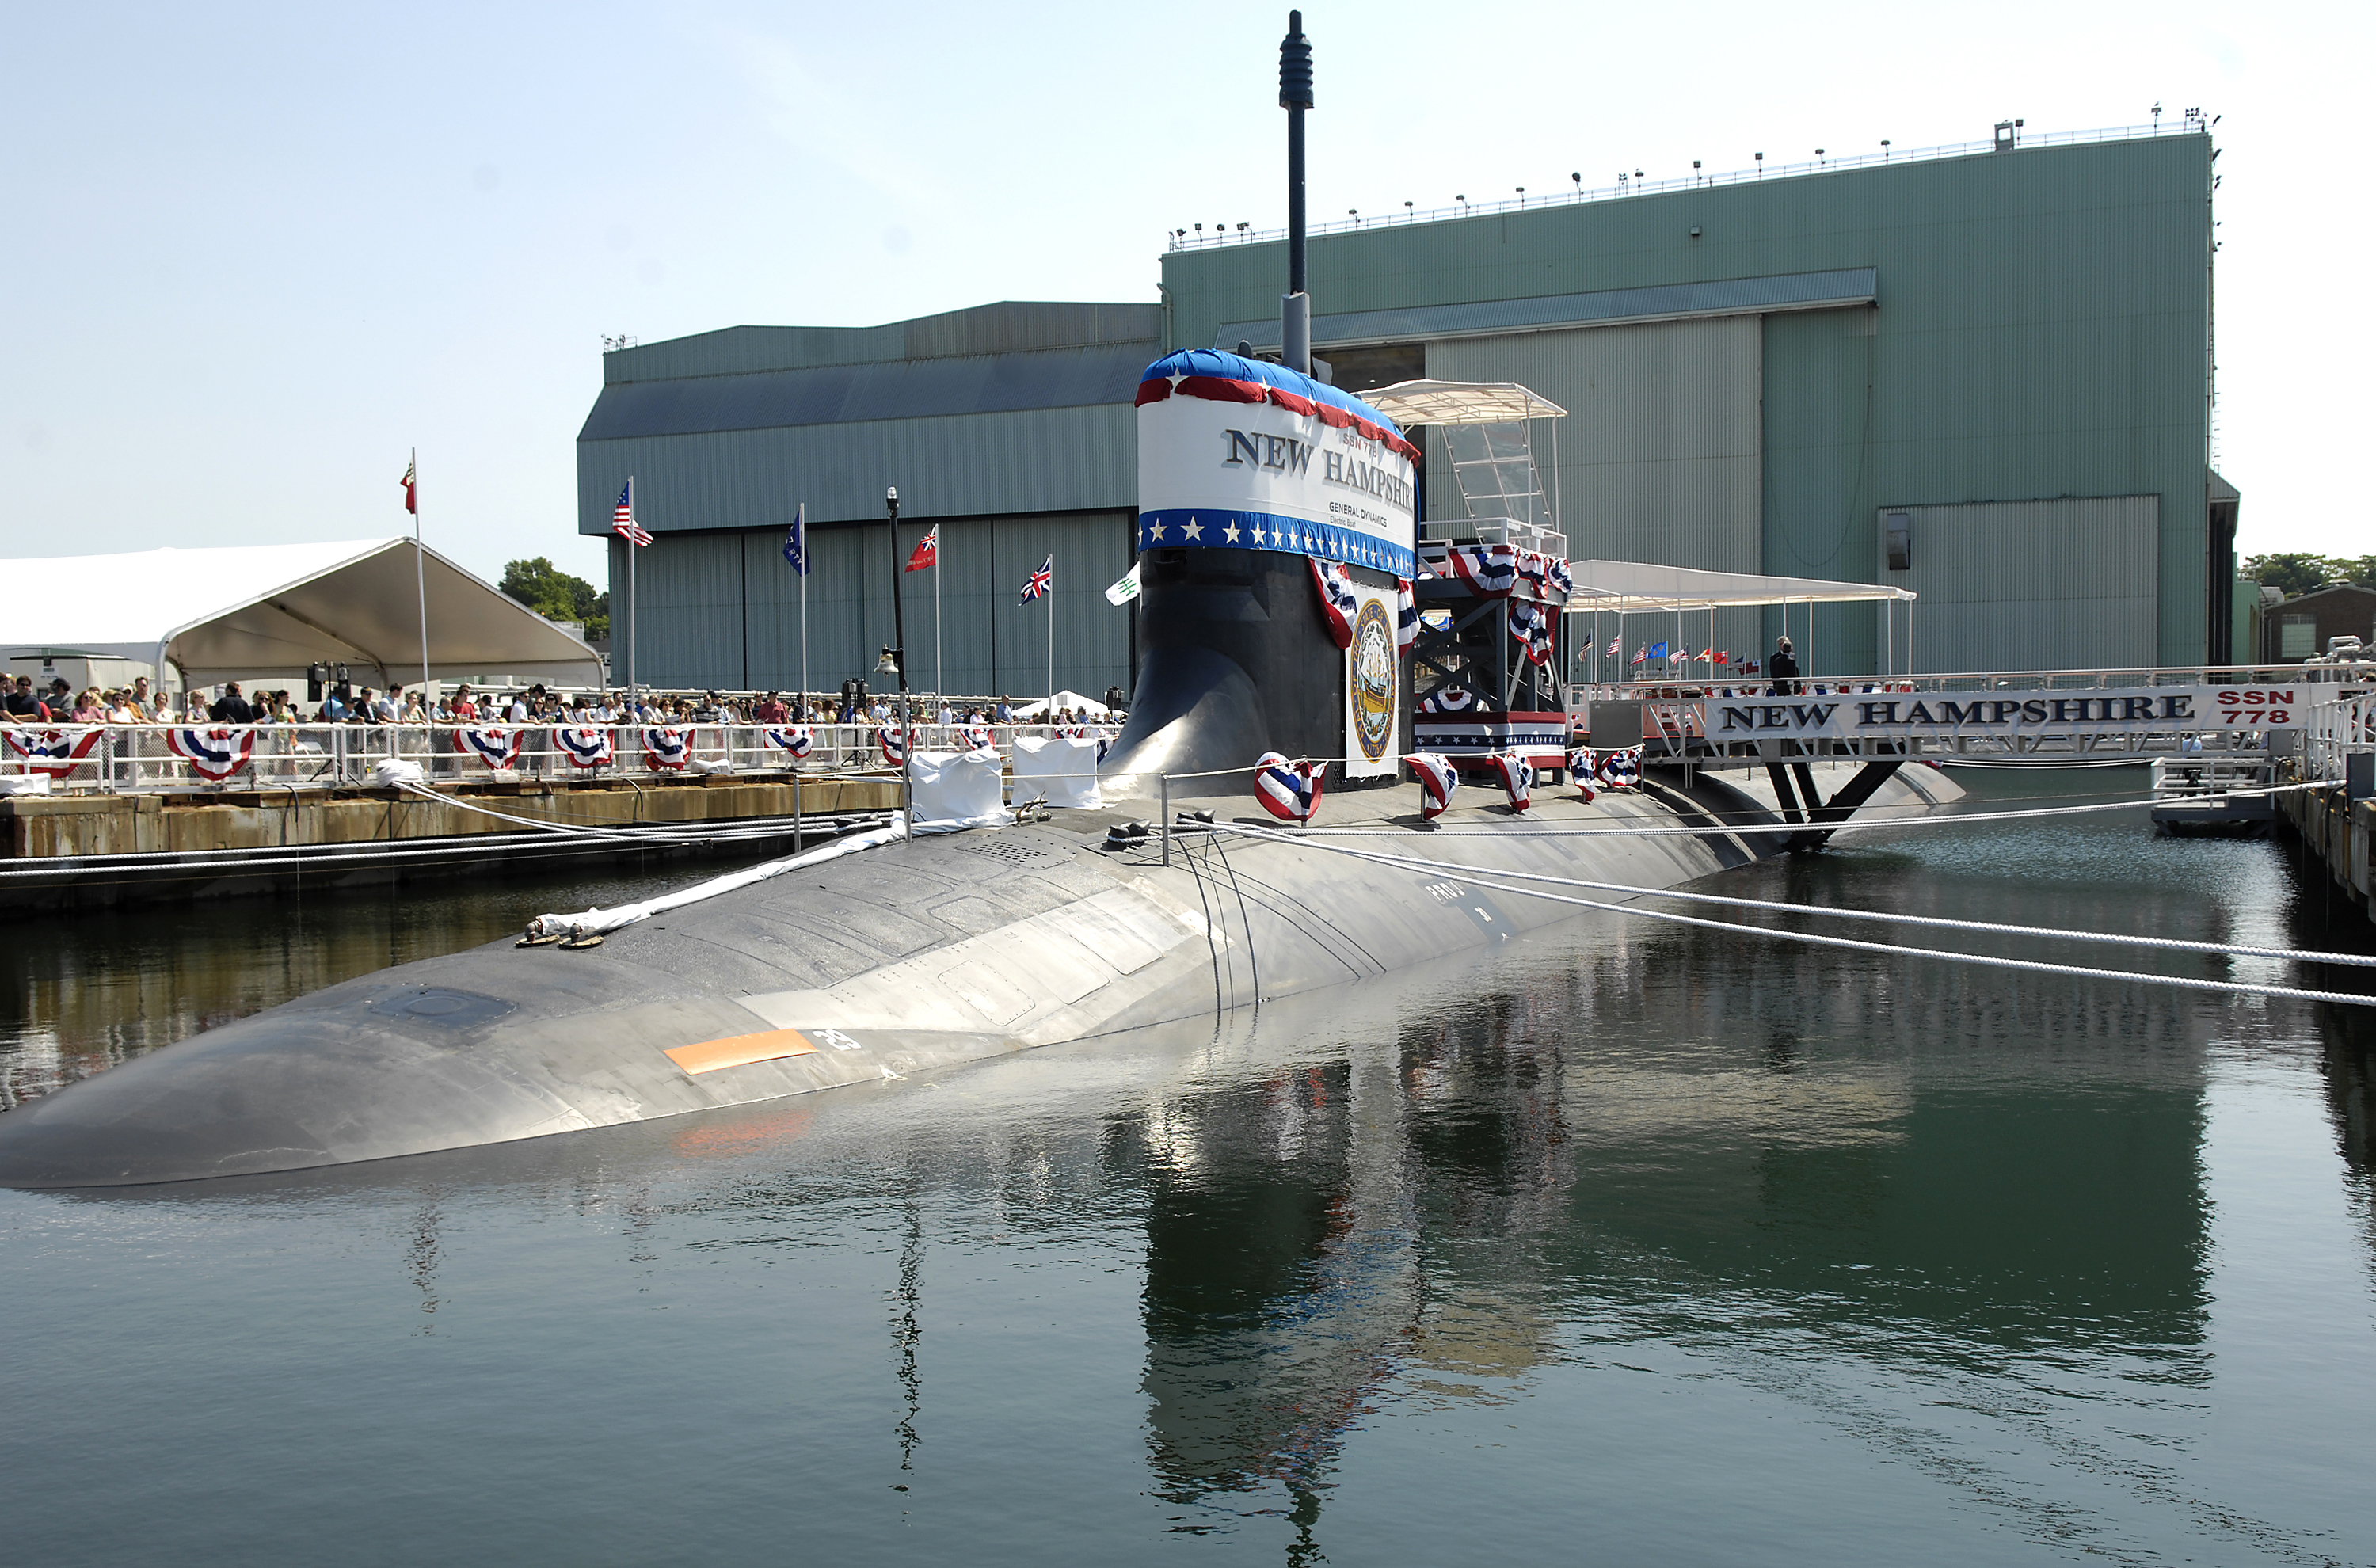 US Navy 080621-N-8467N-001 Pre-commissioning Unit New Hampshire (SSN 778) sits moored to the pier at General Dynamics Electric Boat shipyard moments before her christening ceremony commenced